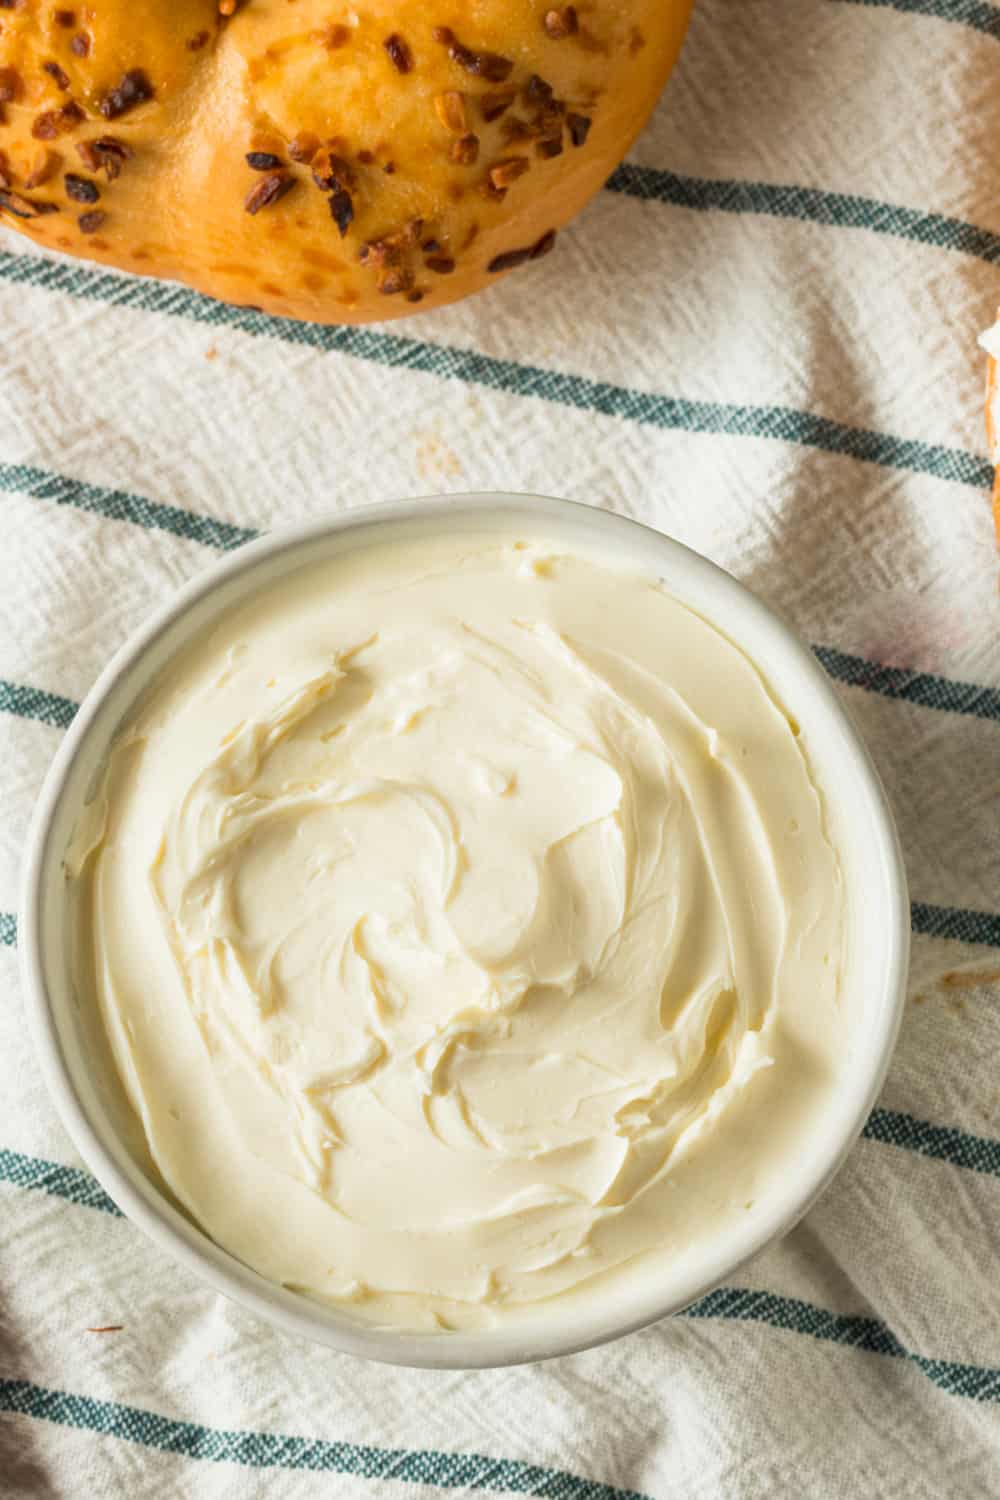 How Long Does Cream Cheese Last